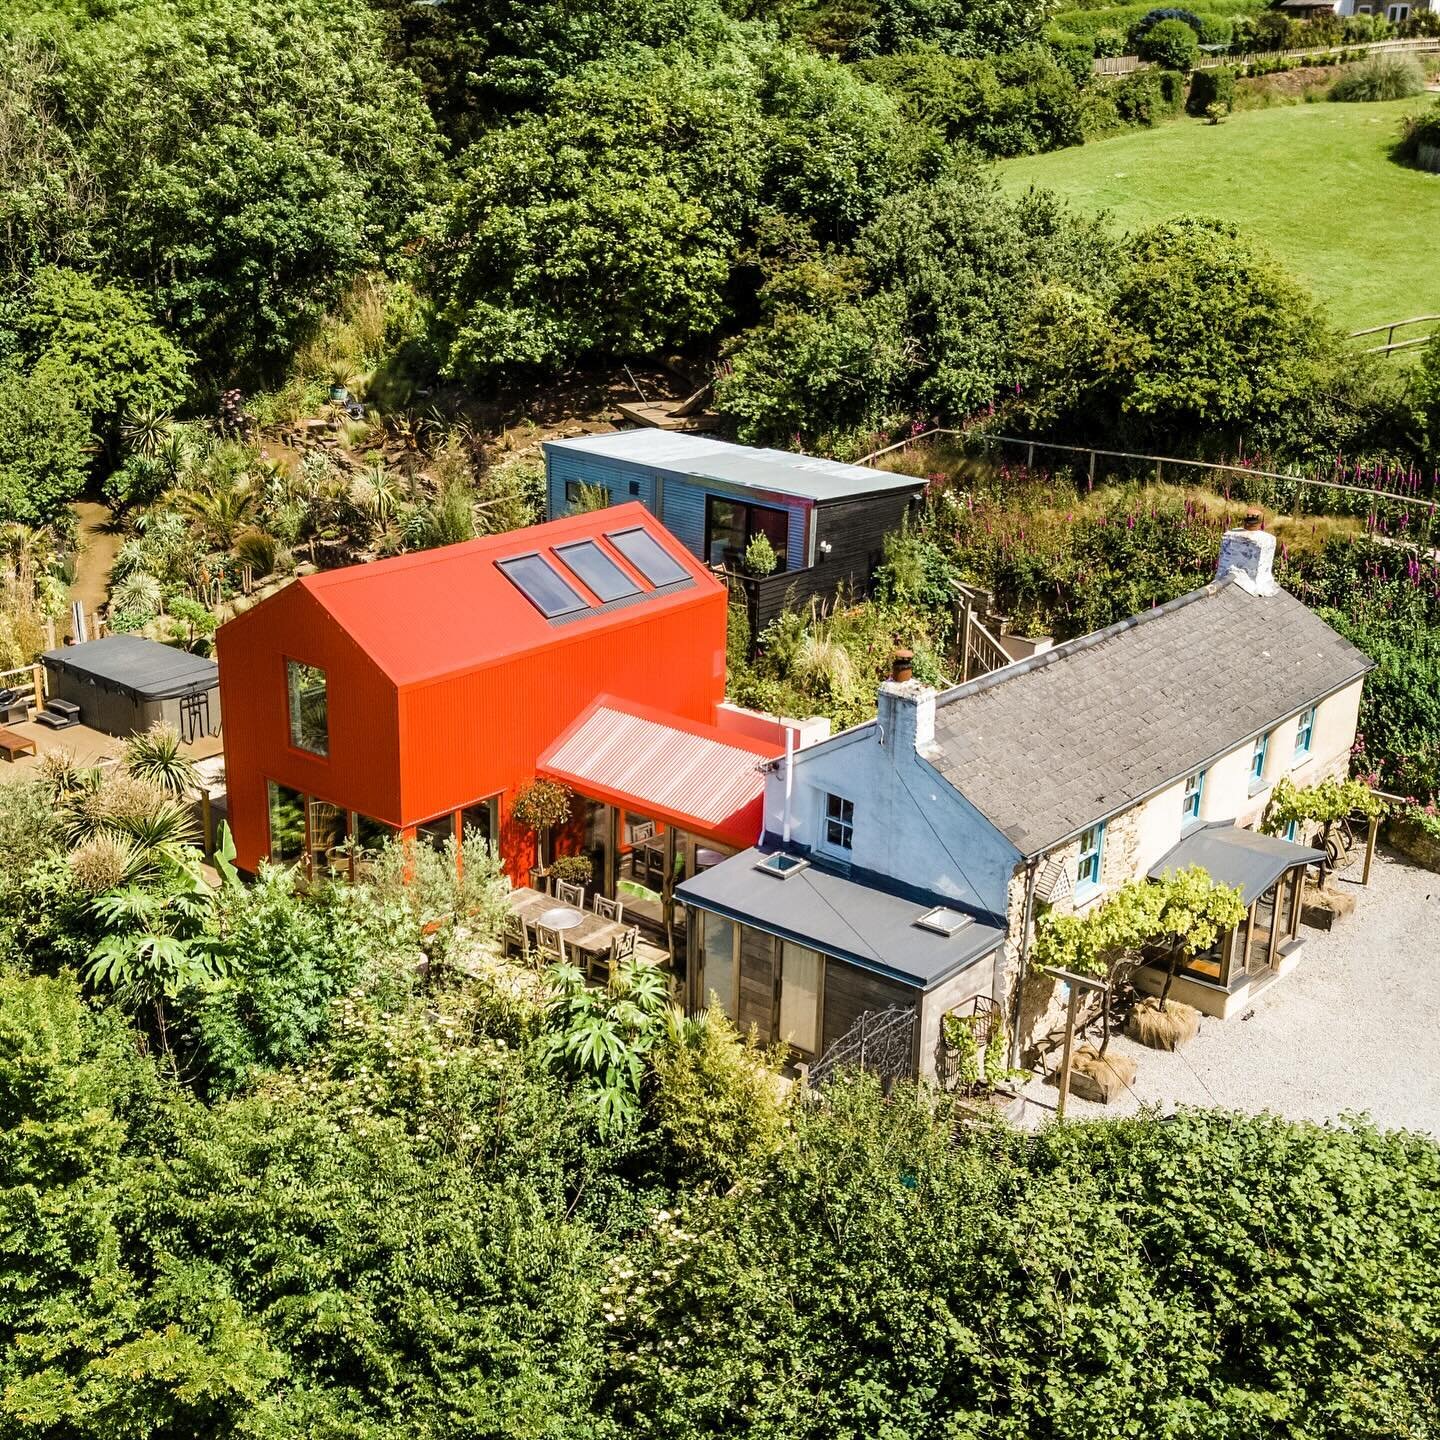 An aerial view of our red extension to an old Cornish cottage, set in a sub-tropical garden.

Photo by @loganirvinemacdougall 

#cornisharchitecture #ribasouthwest #extension #architecture #cornwall